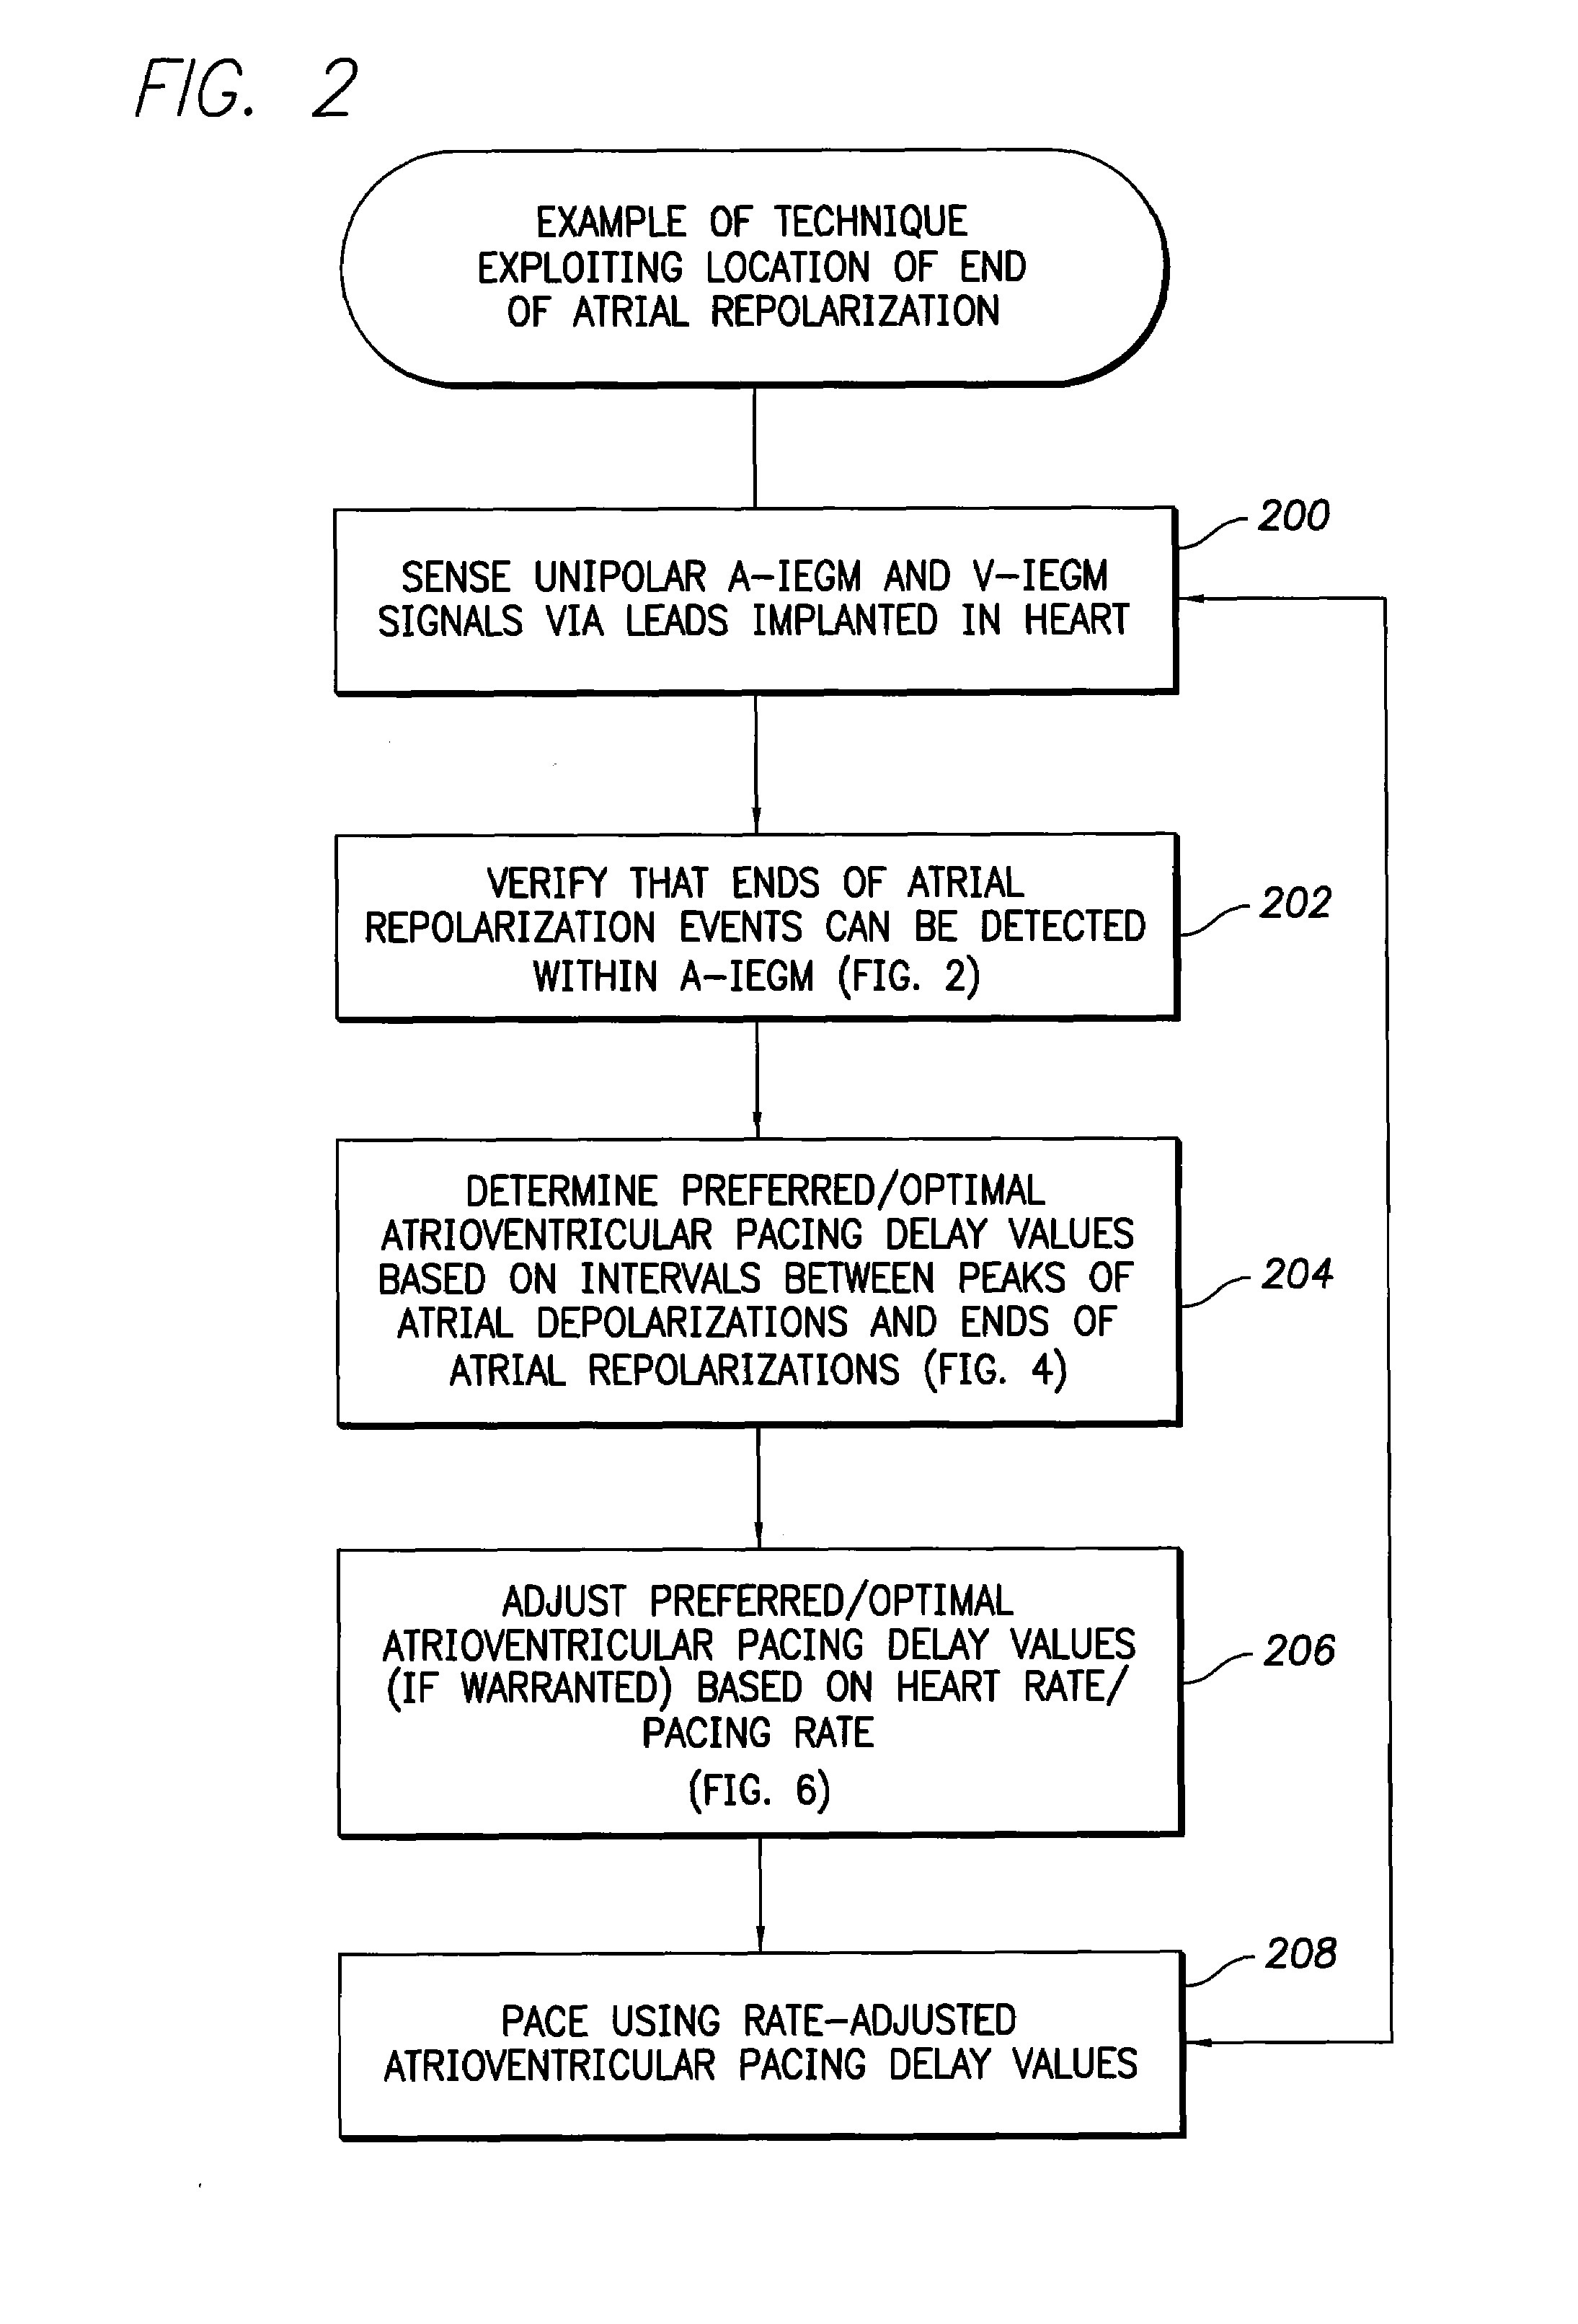 System and method for determining atrioventricular pacing delay based on atrial repolarization